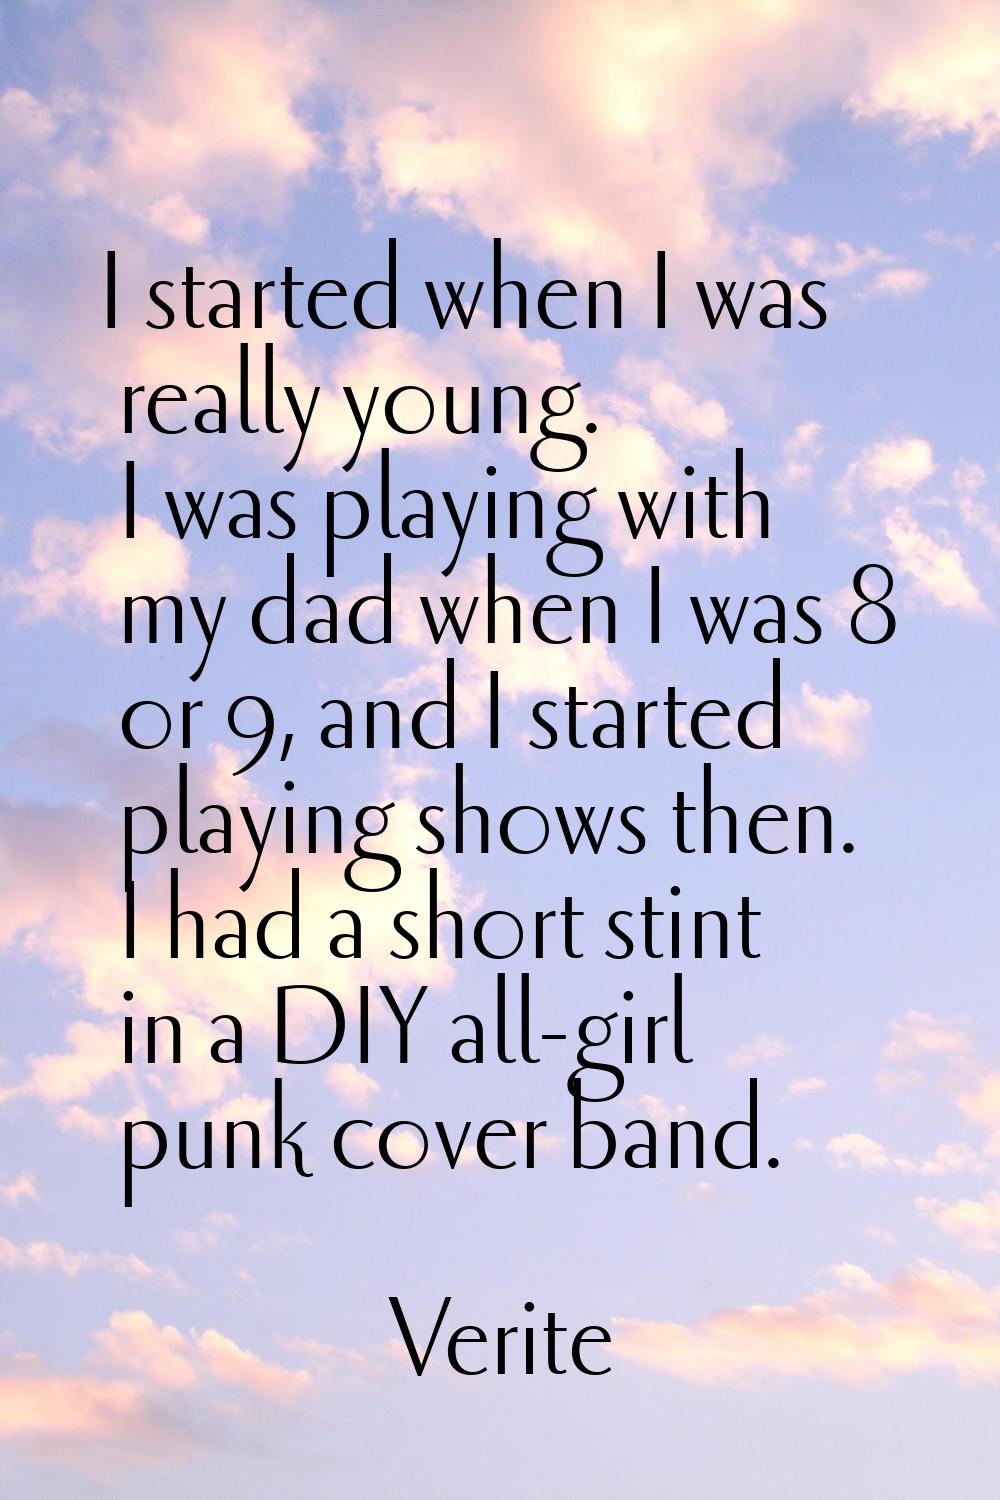 I started when I was really young. I was playing with my dad when I was 8 or 9, and I started playi